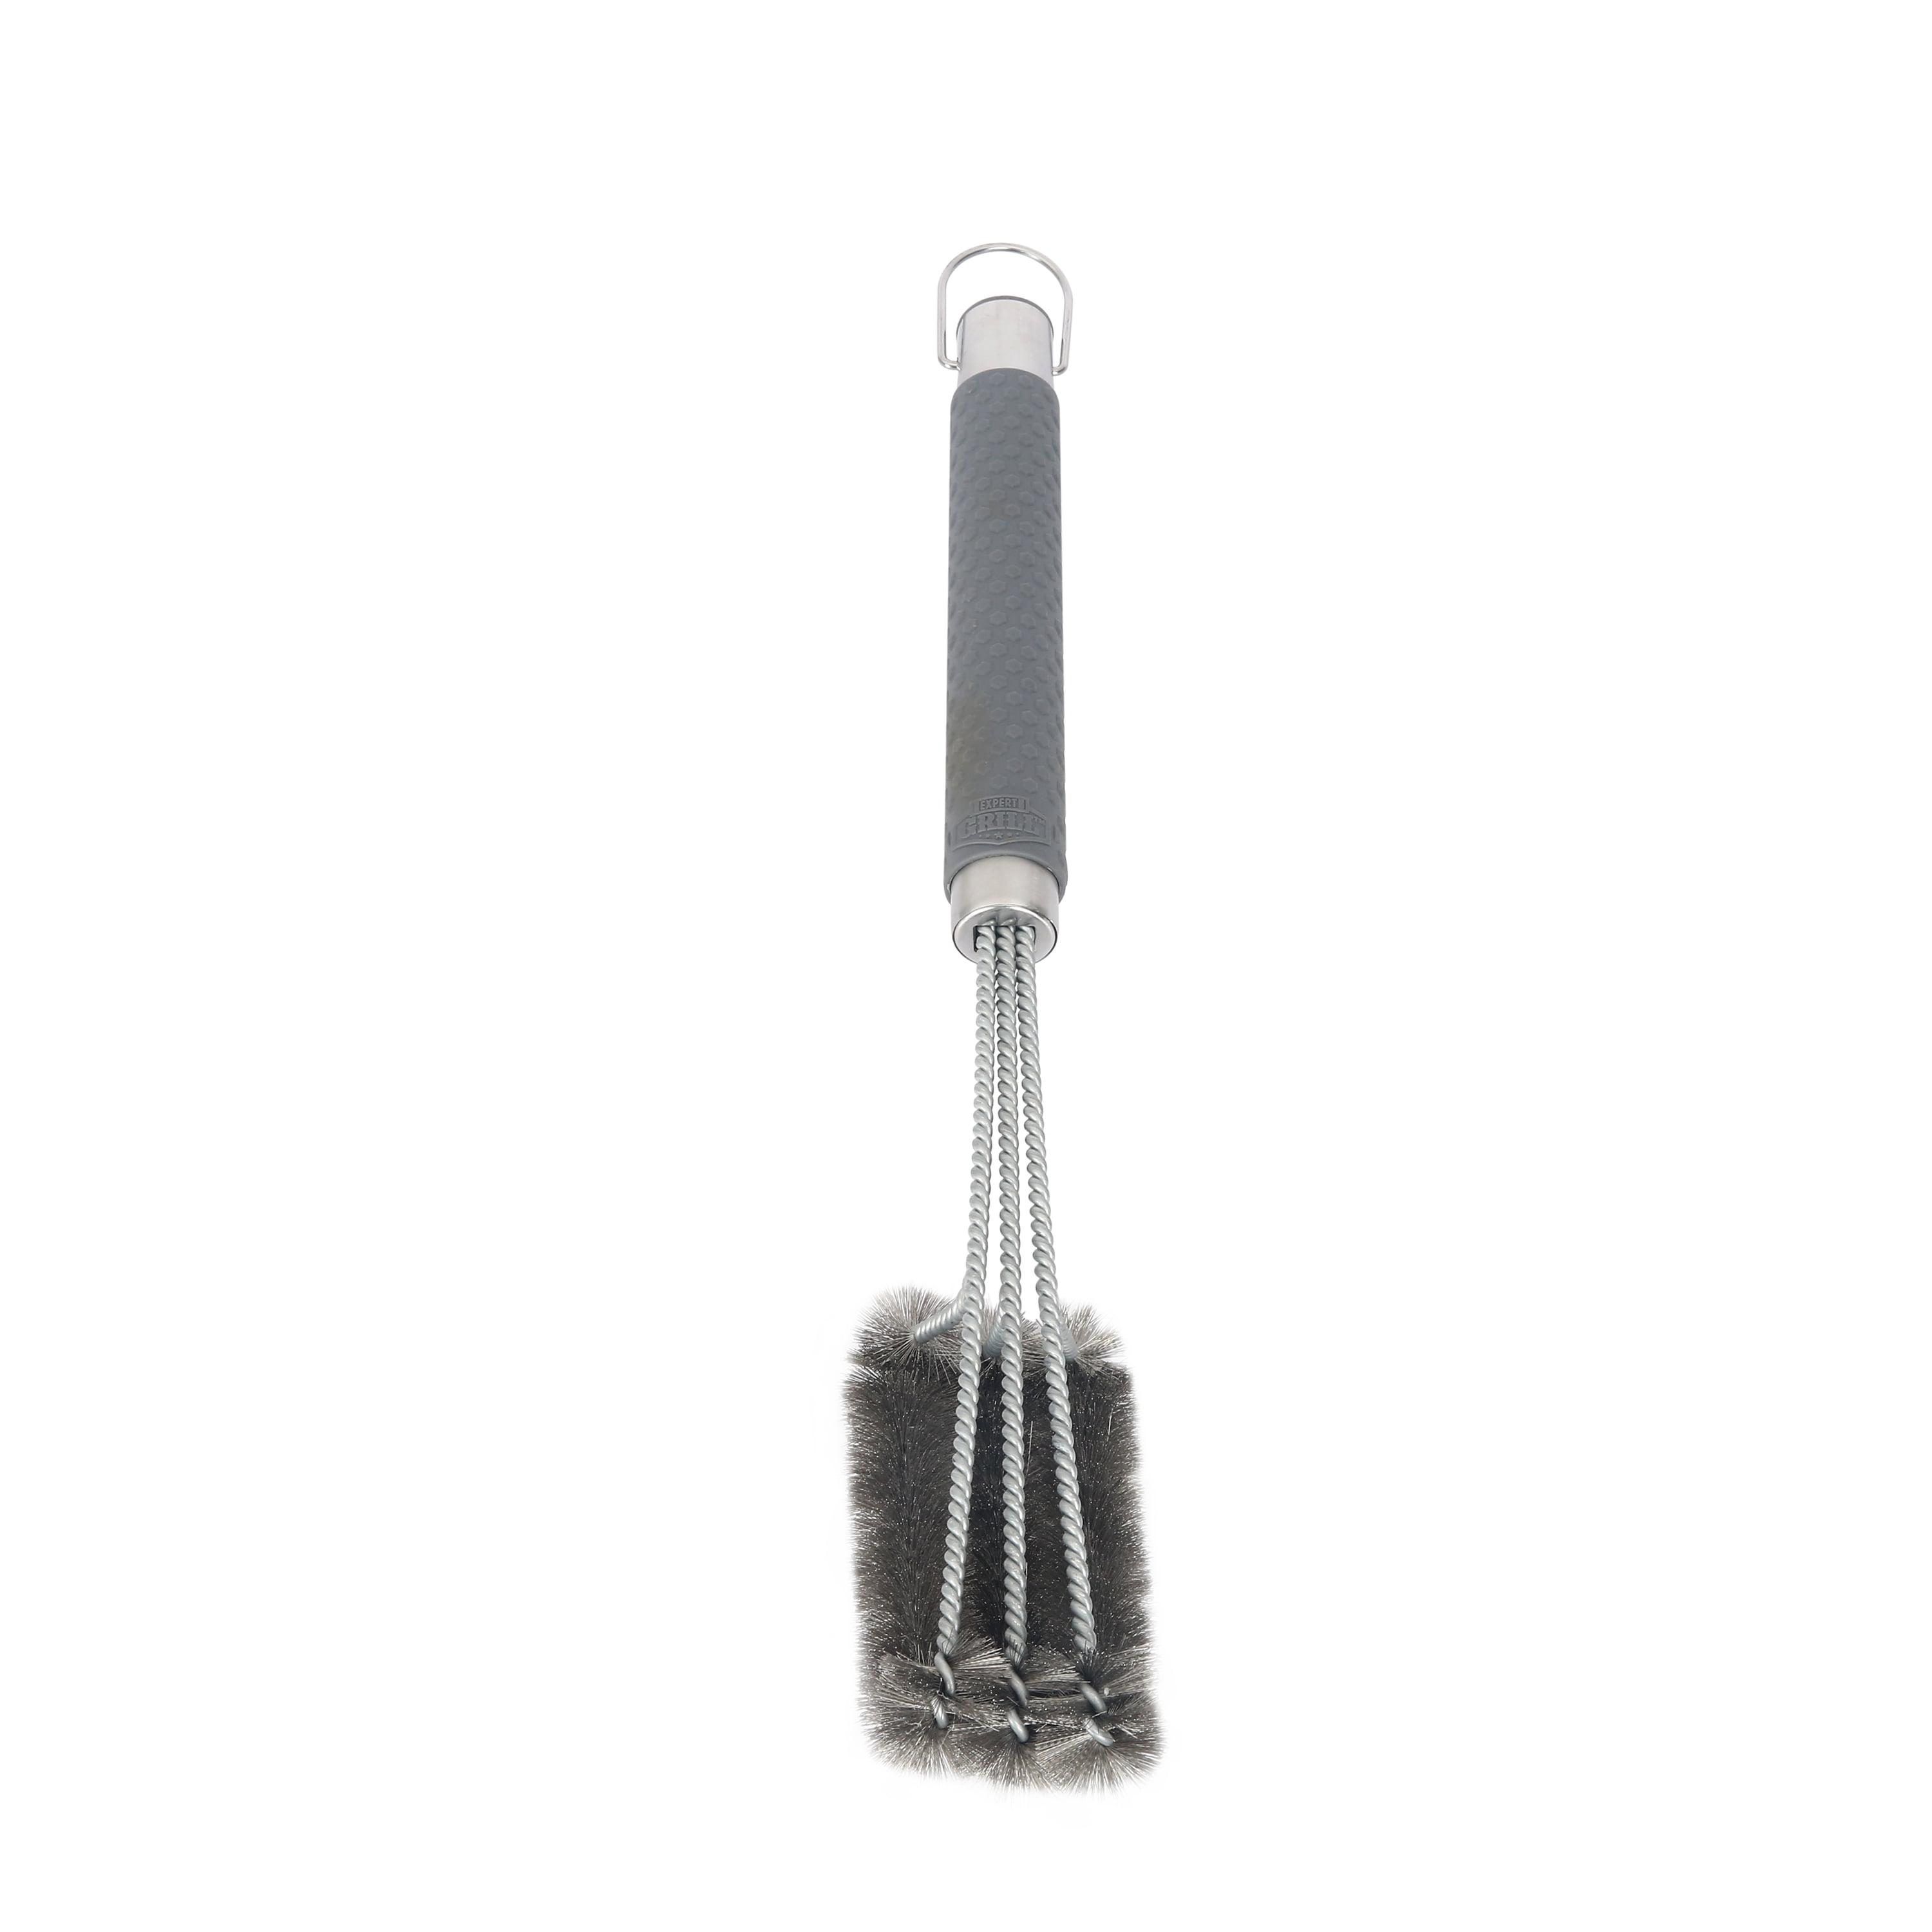 Expert Grill Small 3 Sided Cleaning Grill Brush with Soft Handle 